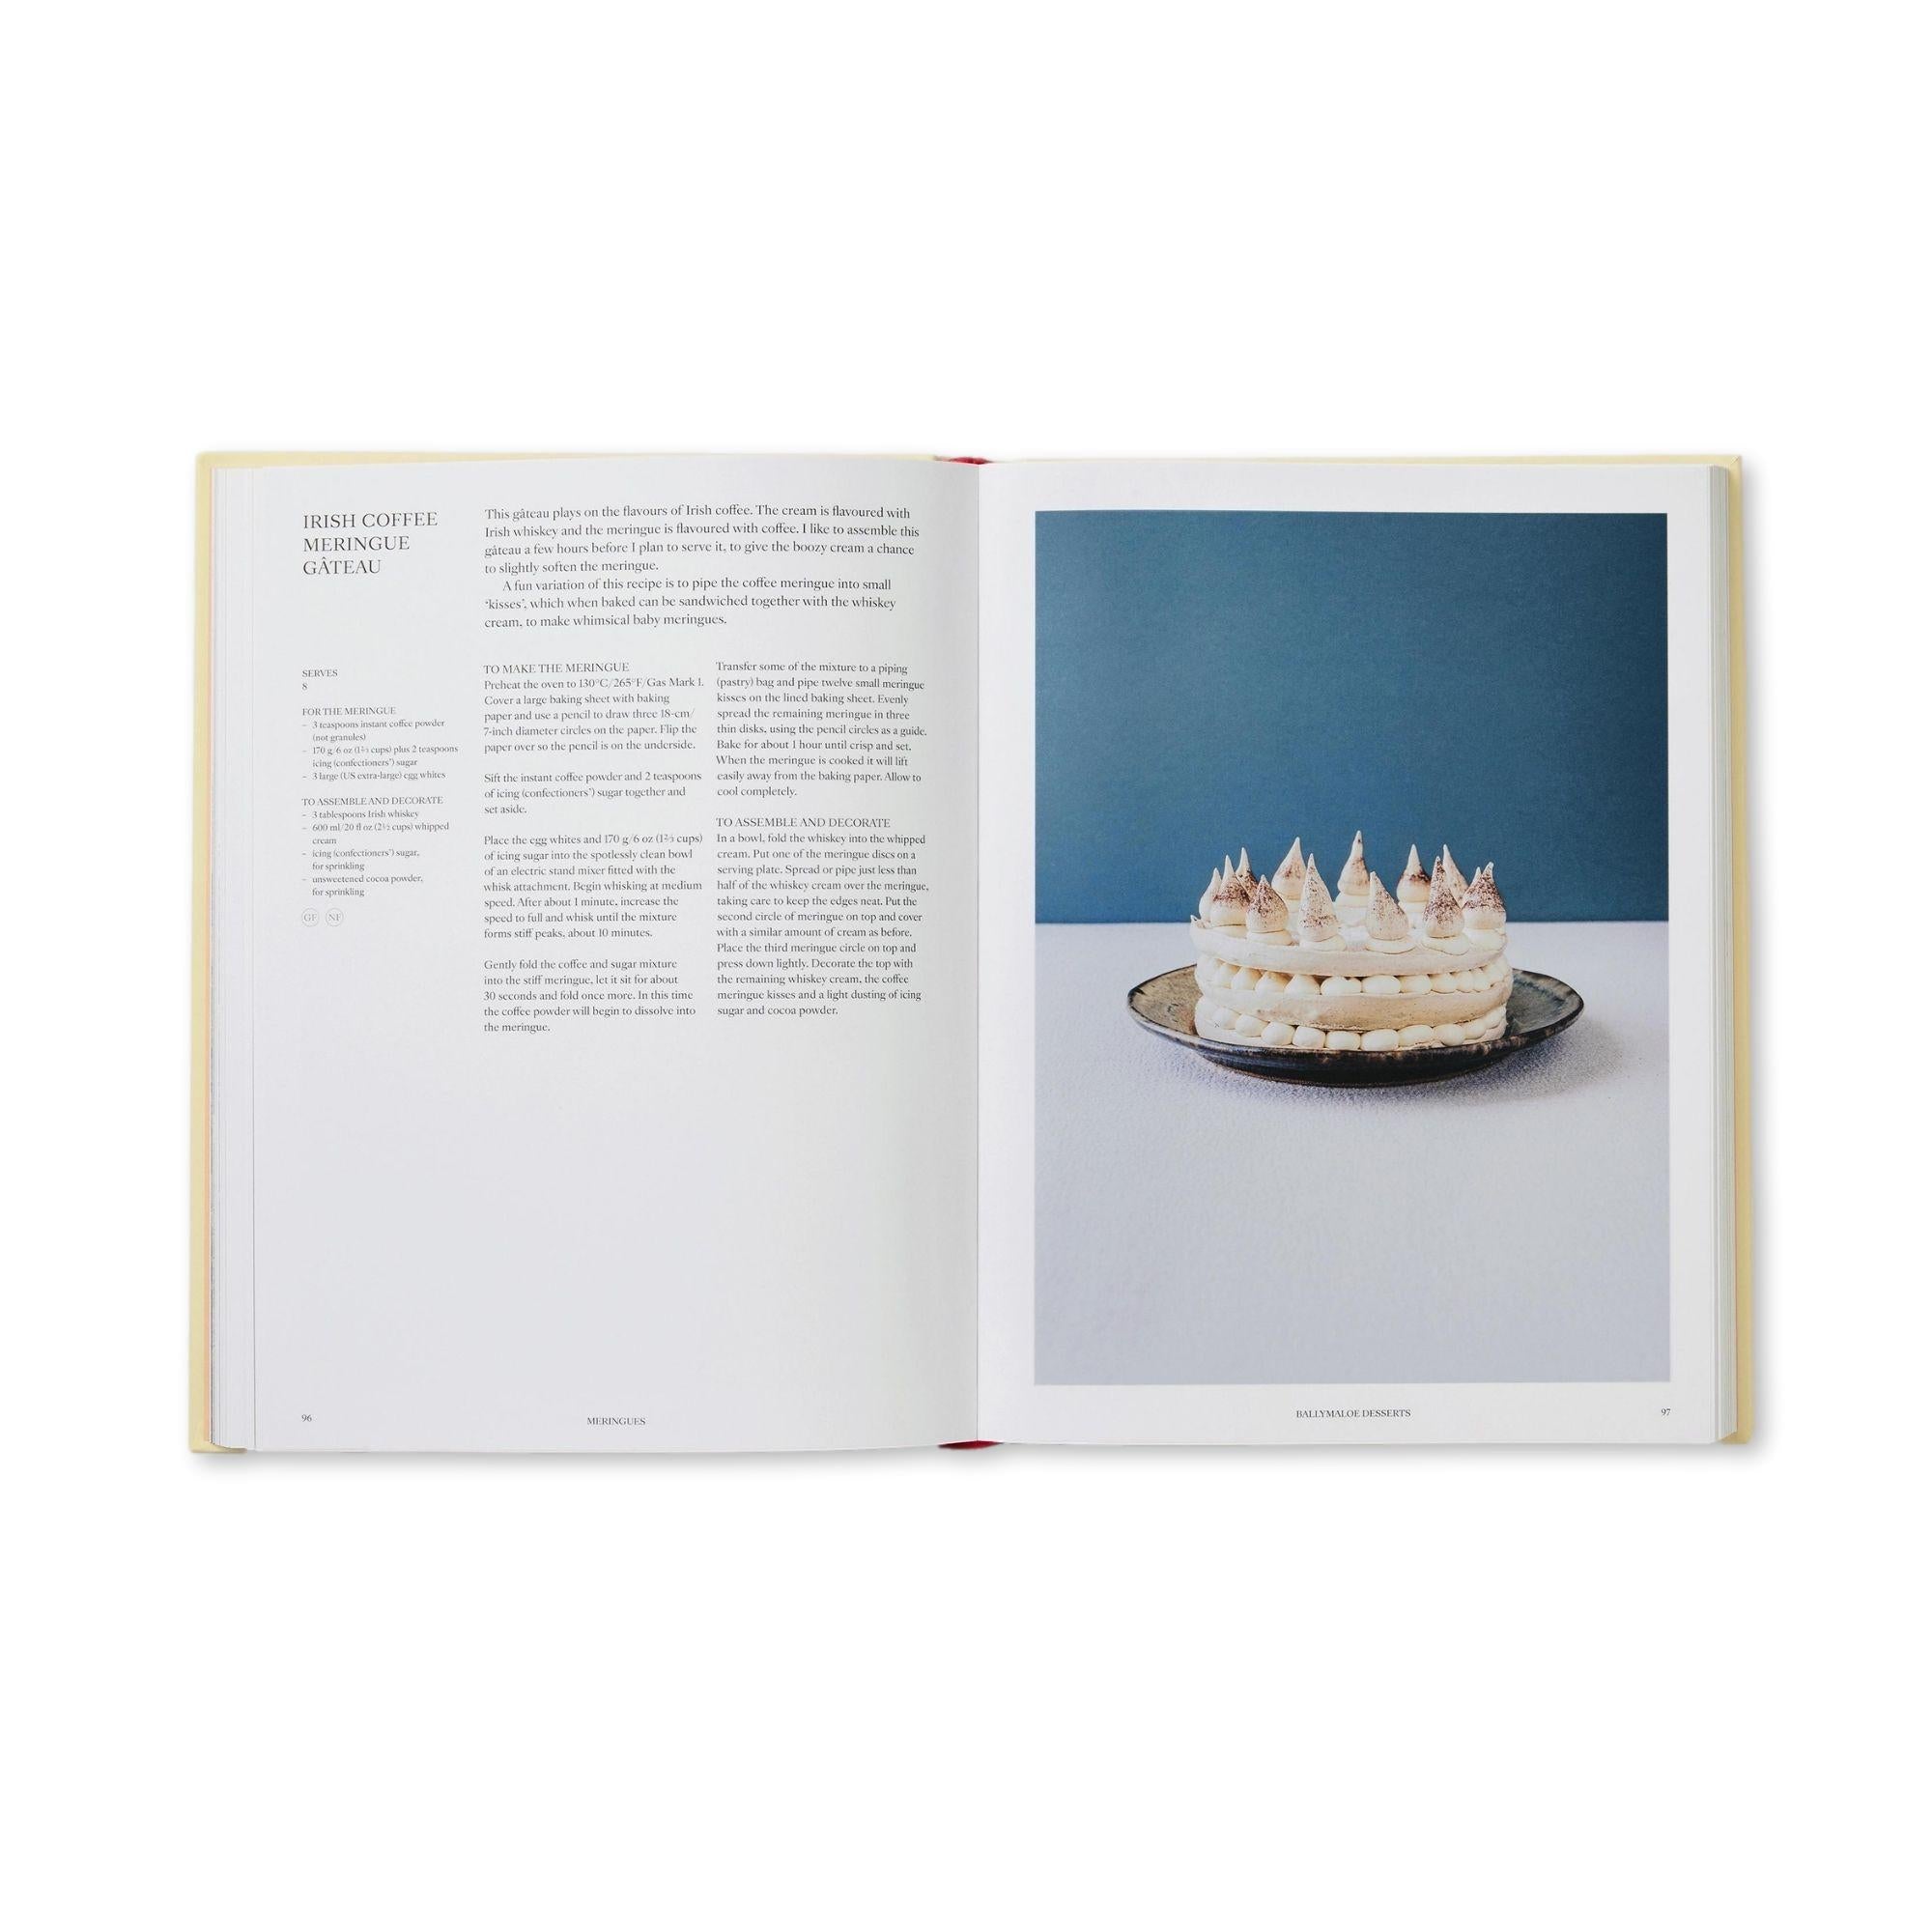 Ballymaloe Desserts: Iconic Recipes and Stories from Ireland Book Phaidon